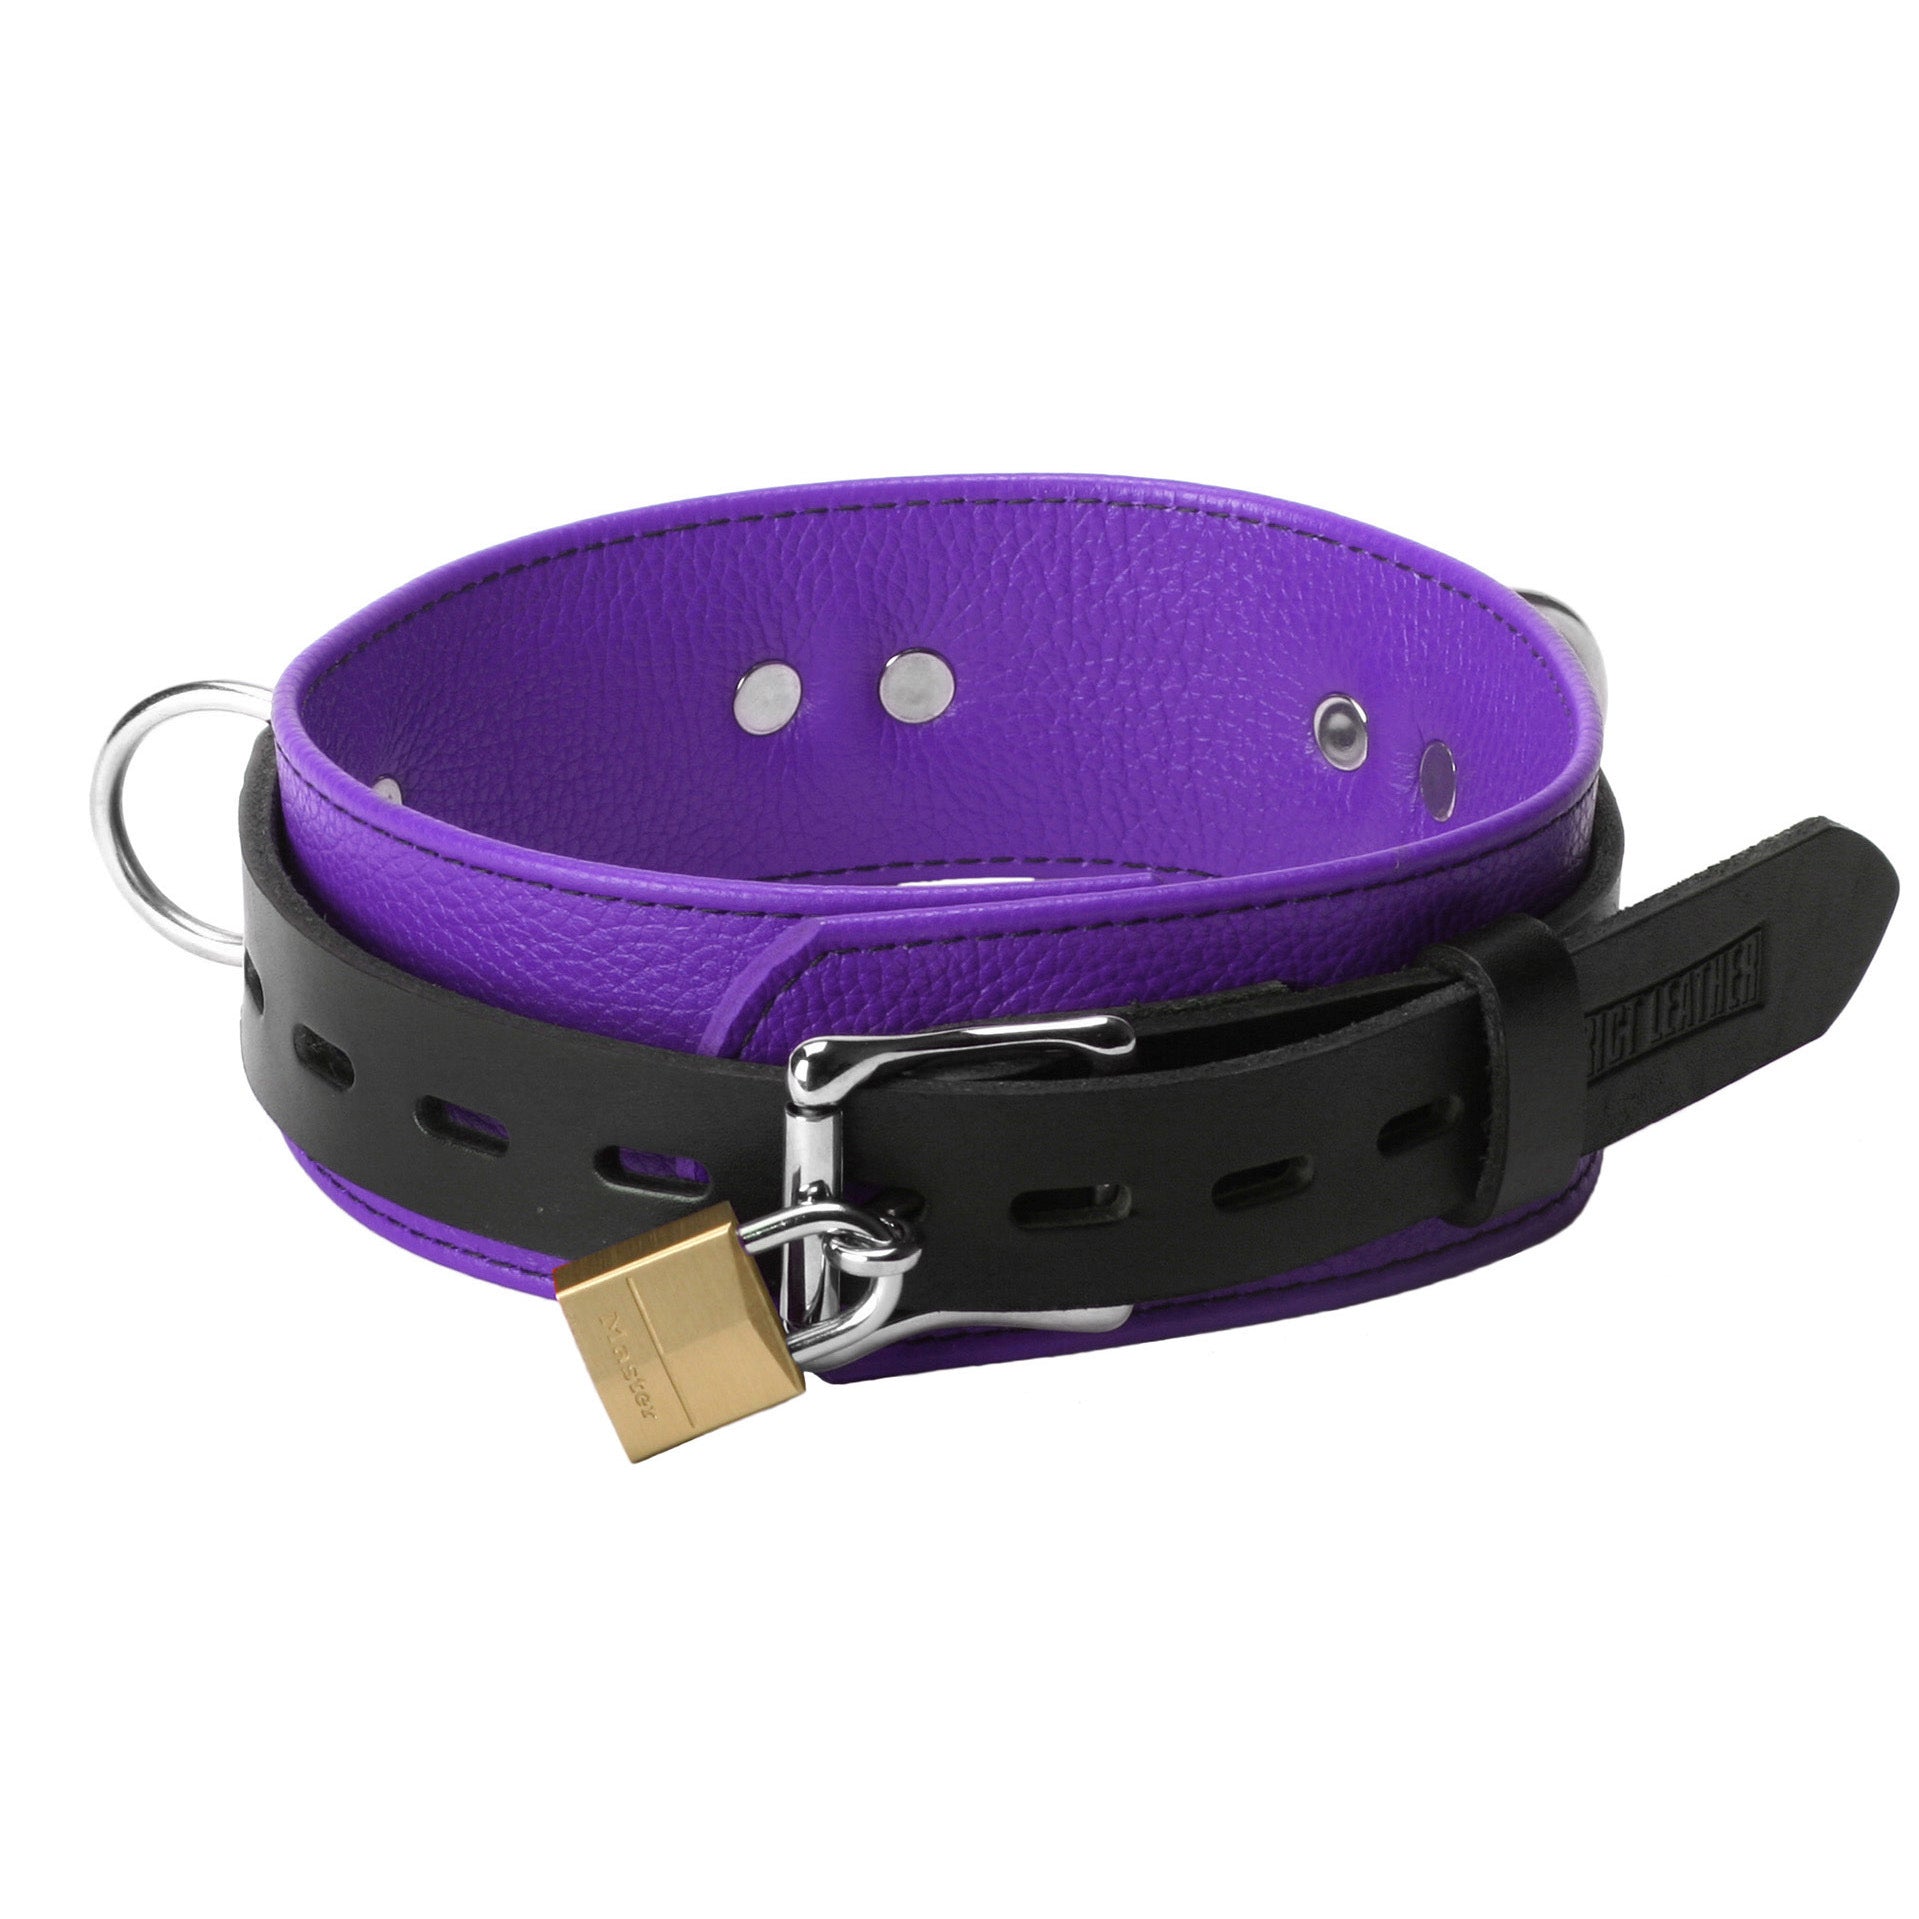 Strict Leather Deluxe Locking Collar - Purple and Black - UABDSM